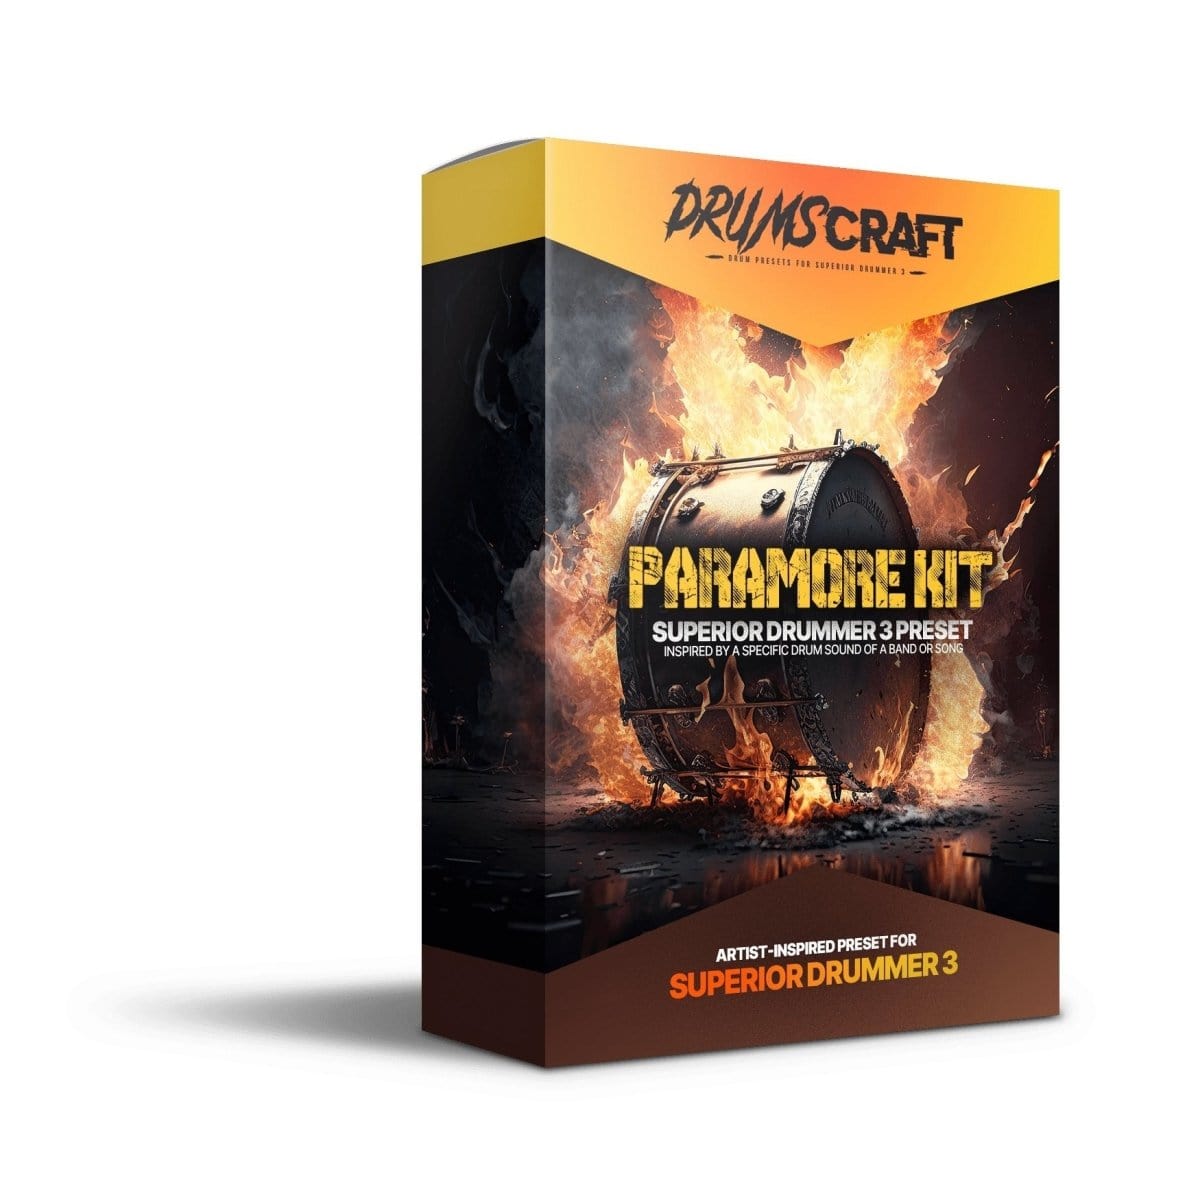 Paramore Kit - Superior Drummer 3 Presets by Develop Device